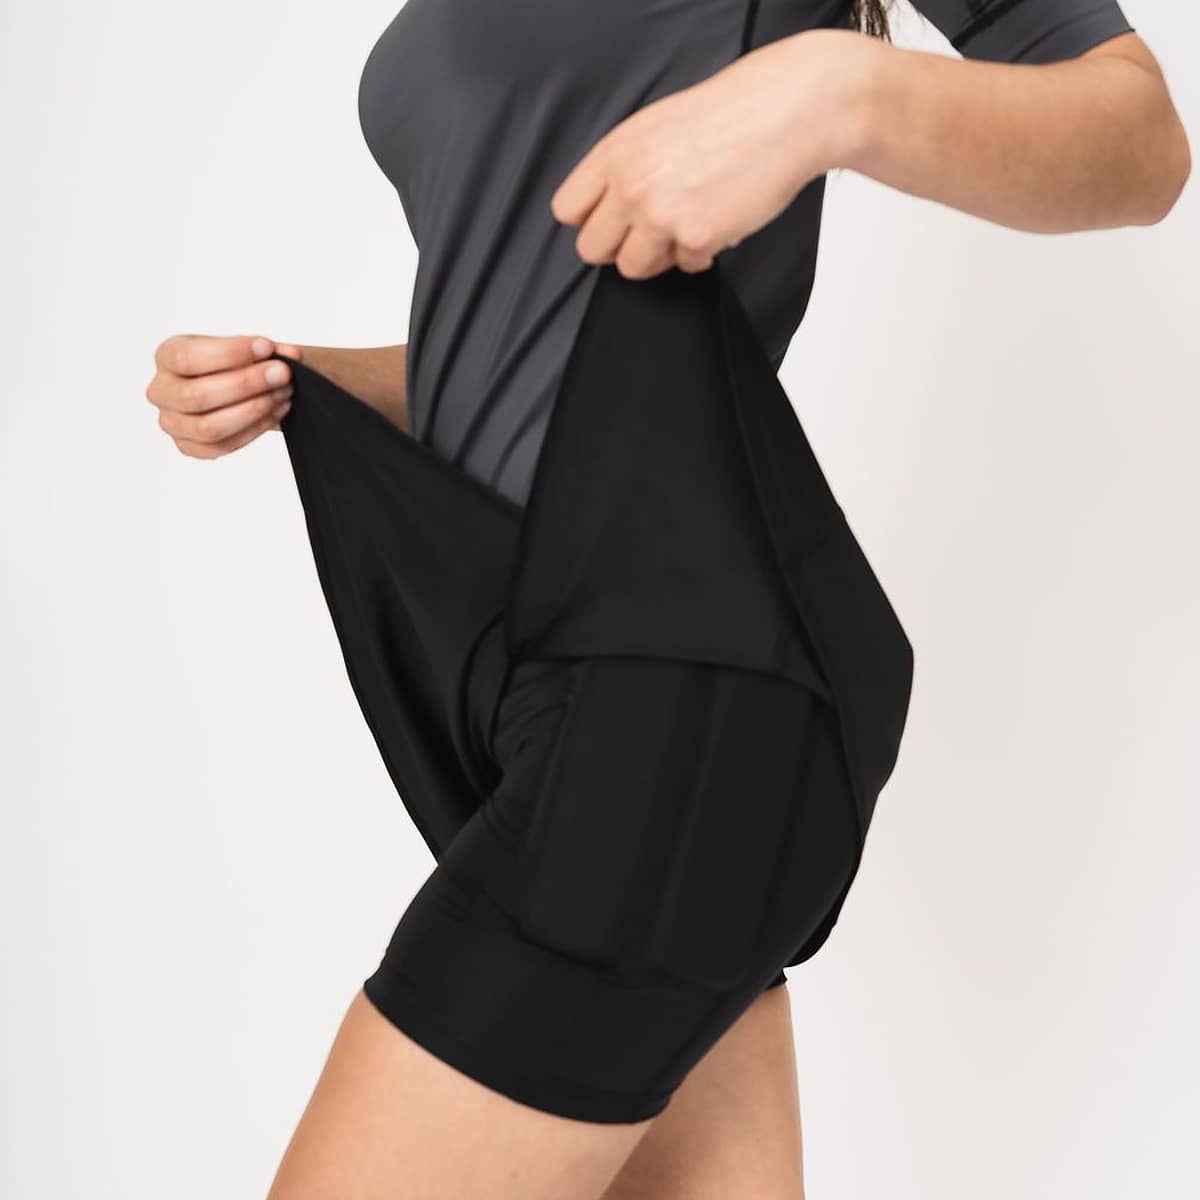 Up close image of woman lifting the skort to show the weighted shorts under the skort